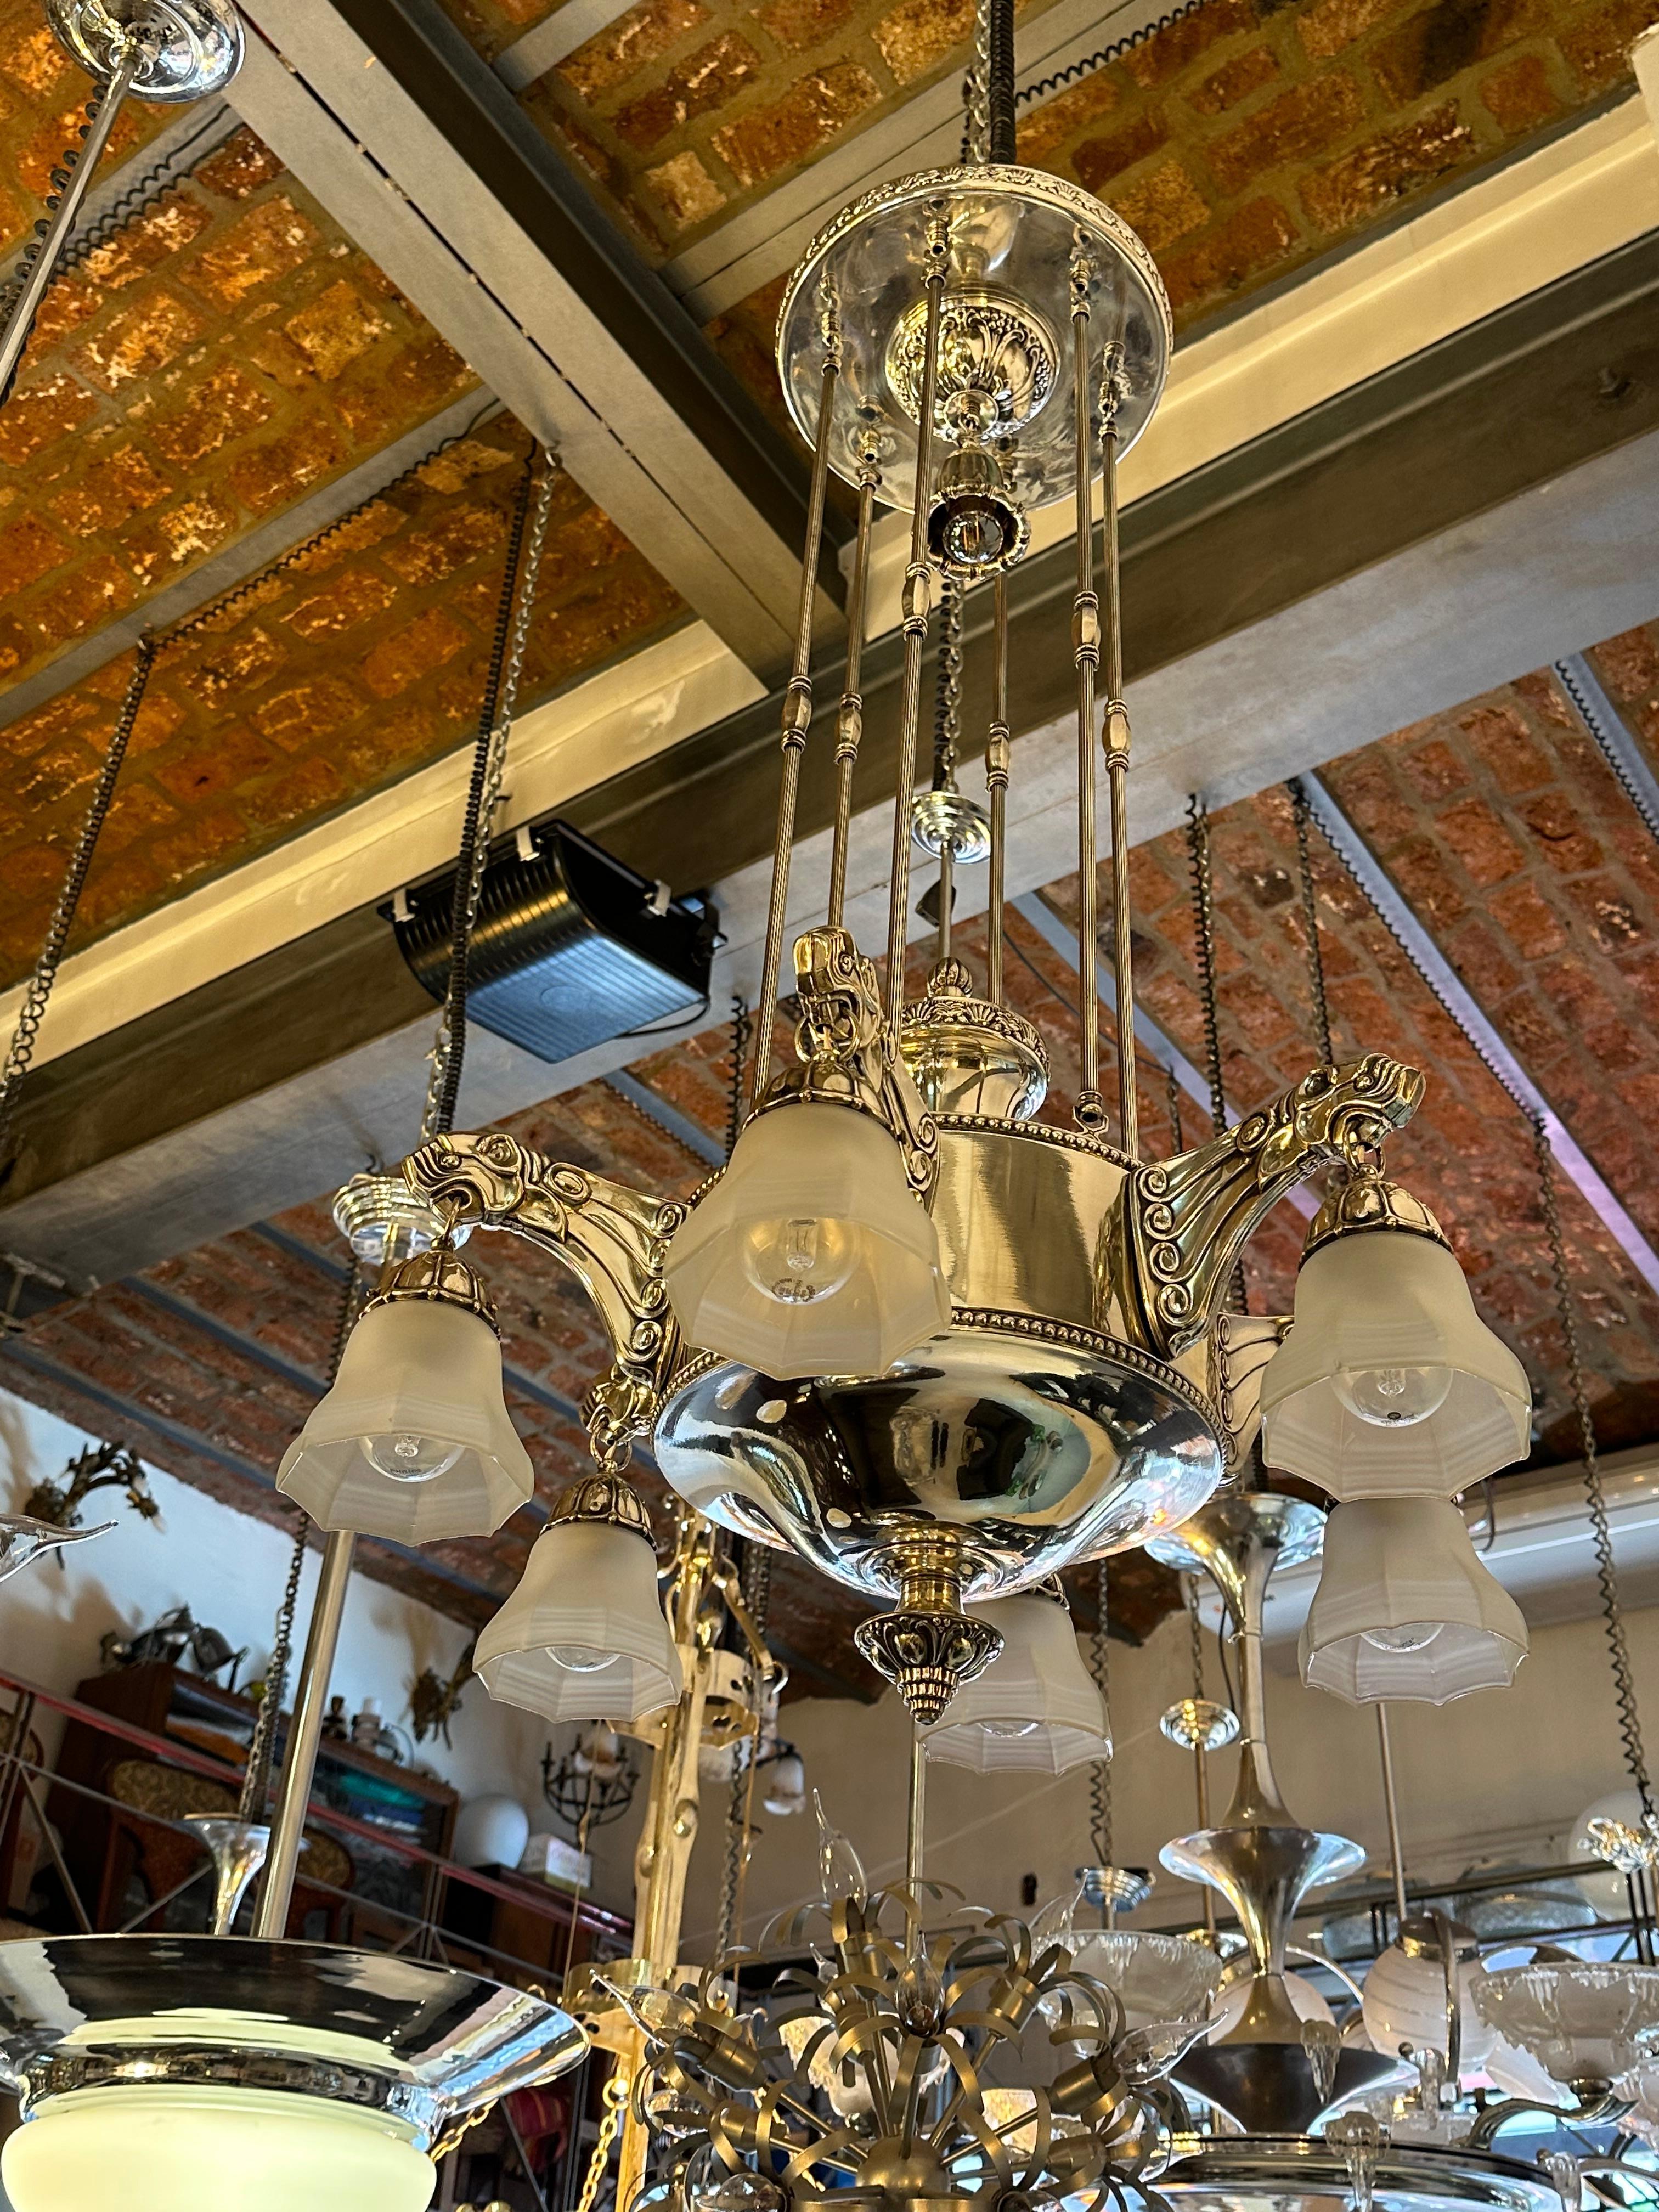 Hanging lamp vienna Secession
Material: silver plated bronze, glass
Style: Vienna Secession
Country: Vienna
If you have any questions we are at your disposal.
To take care of your property and the lives of our customers, the new wiring has been